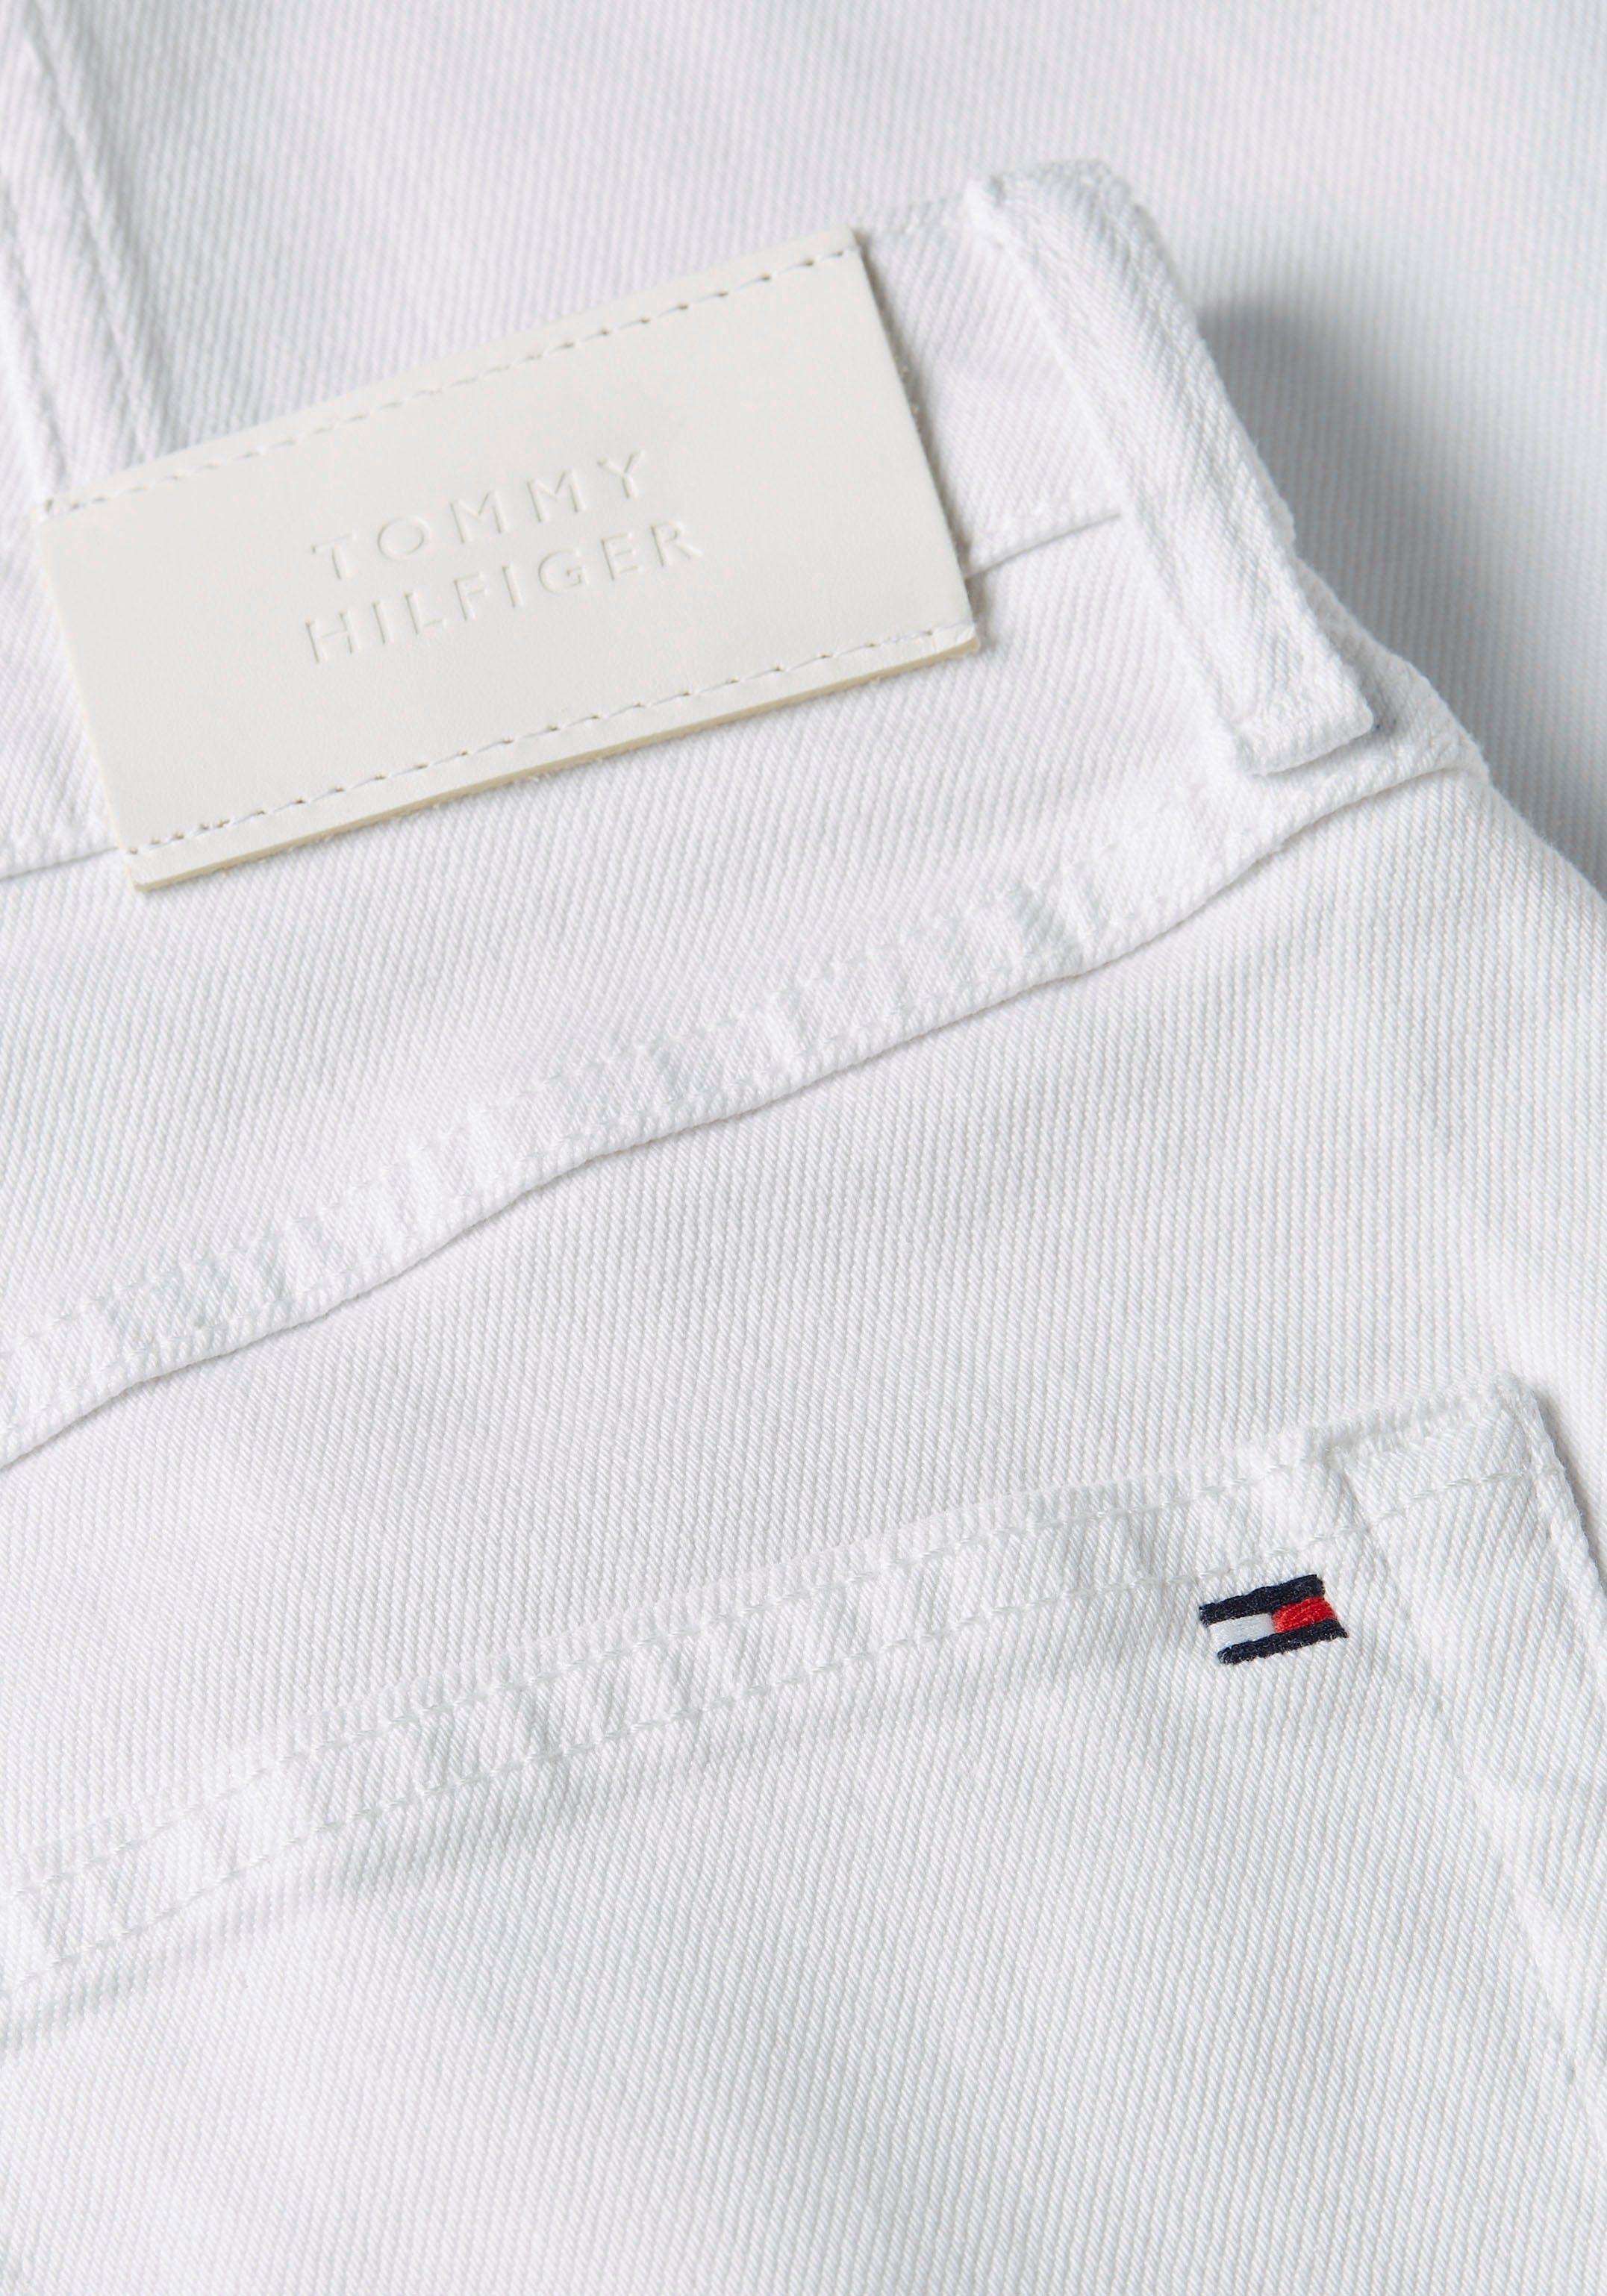 Tommy Hilfiger PAM STRAIGHT Relax-fit-Jeans white in HW Waschung RELAXED Optic weißer